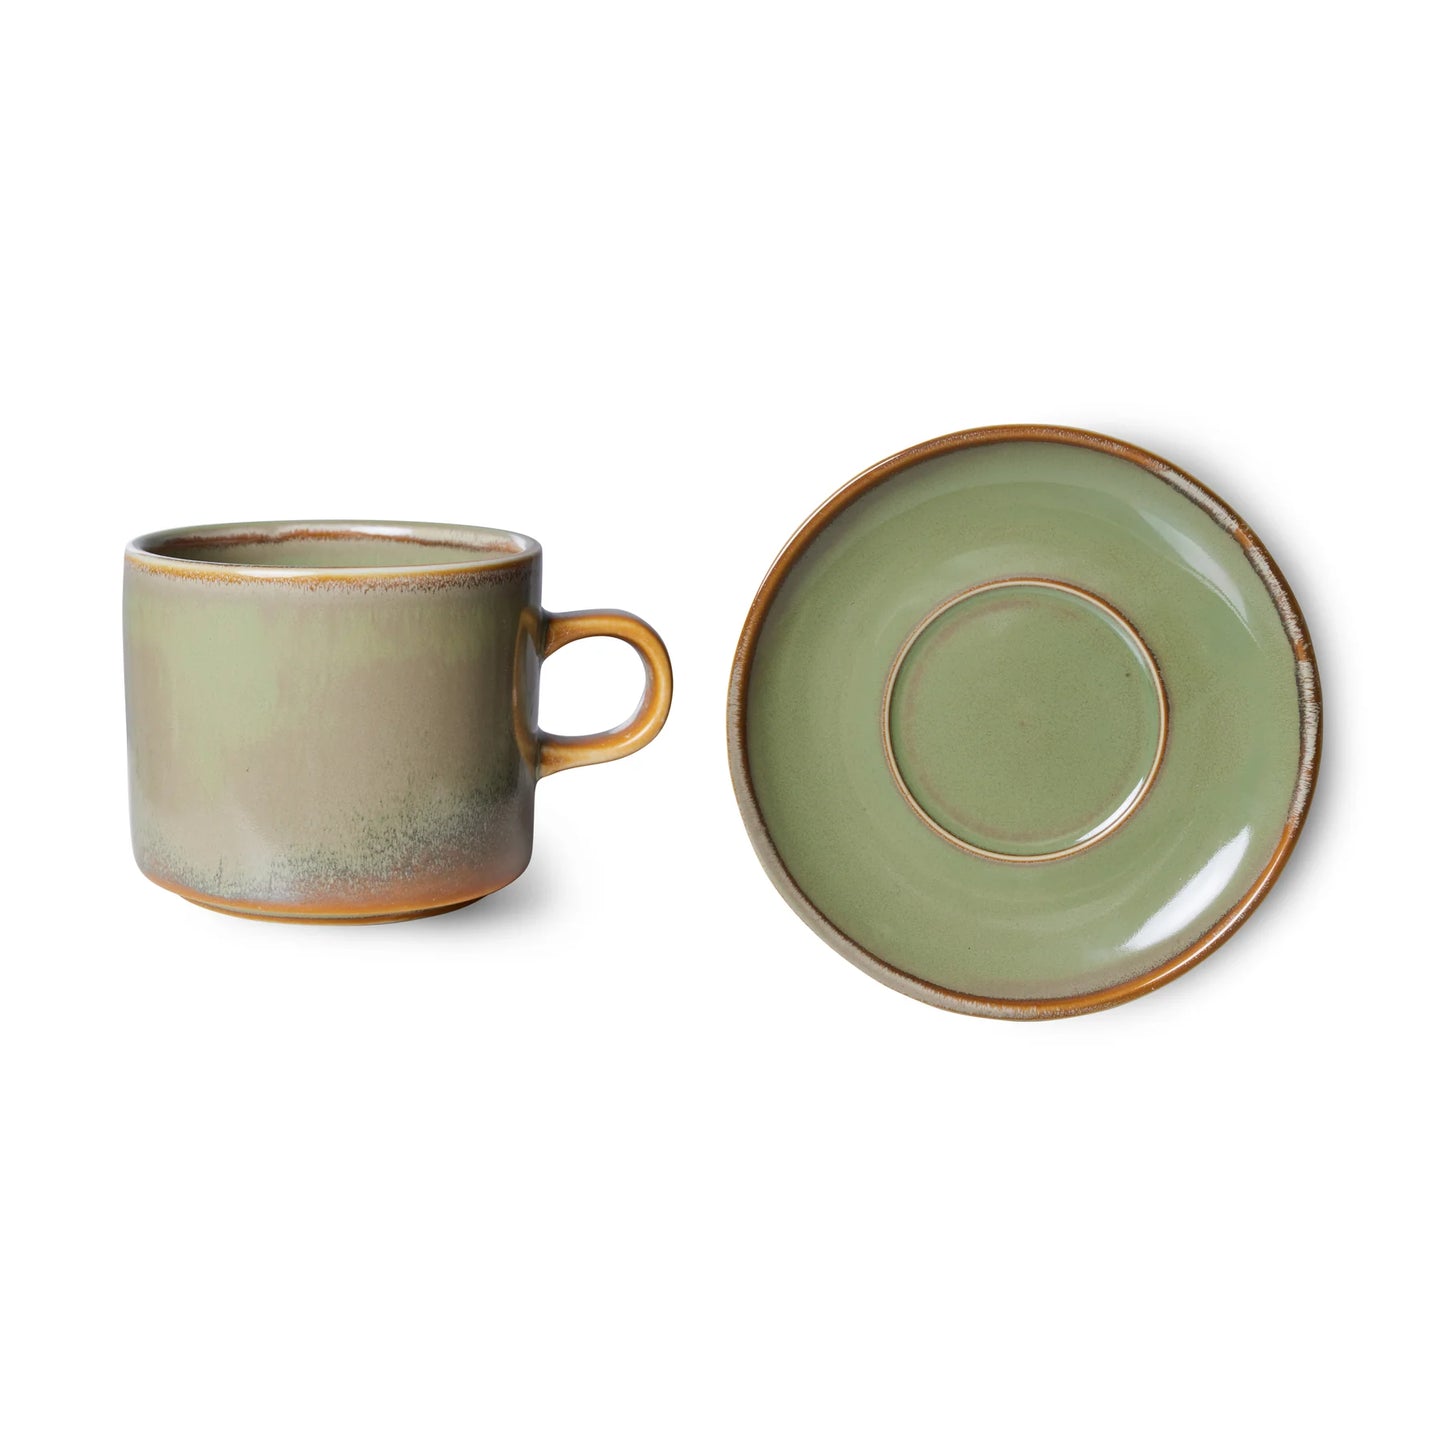 Hkliving : Chef ceramics: cup and saucer, moss green